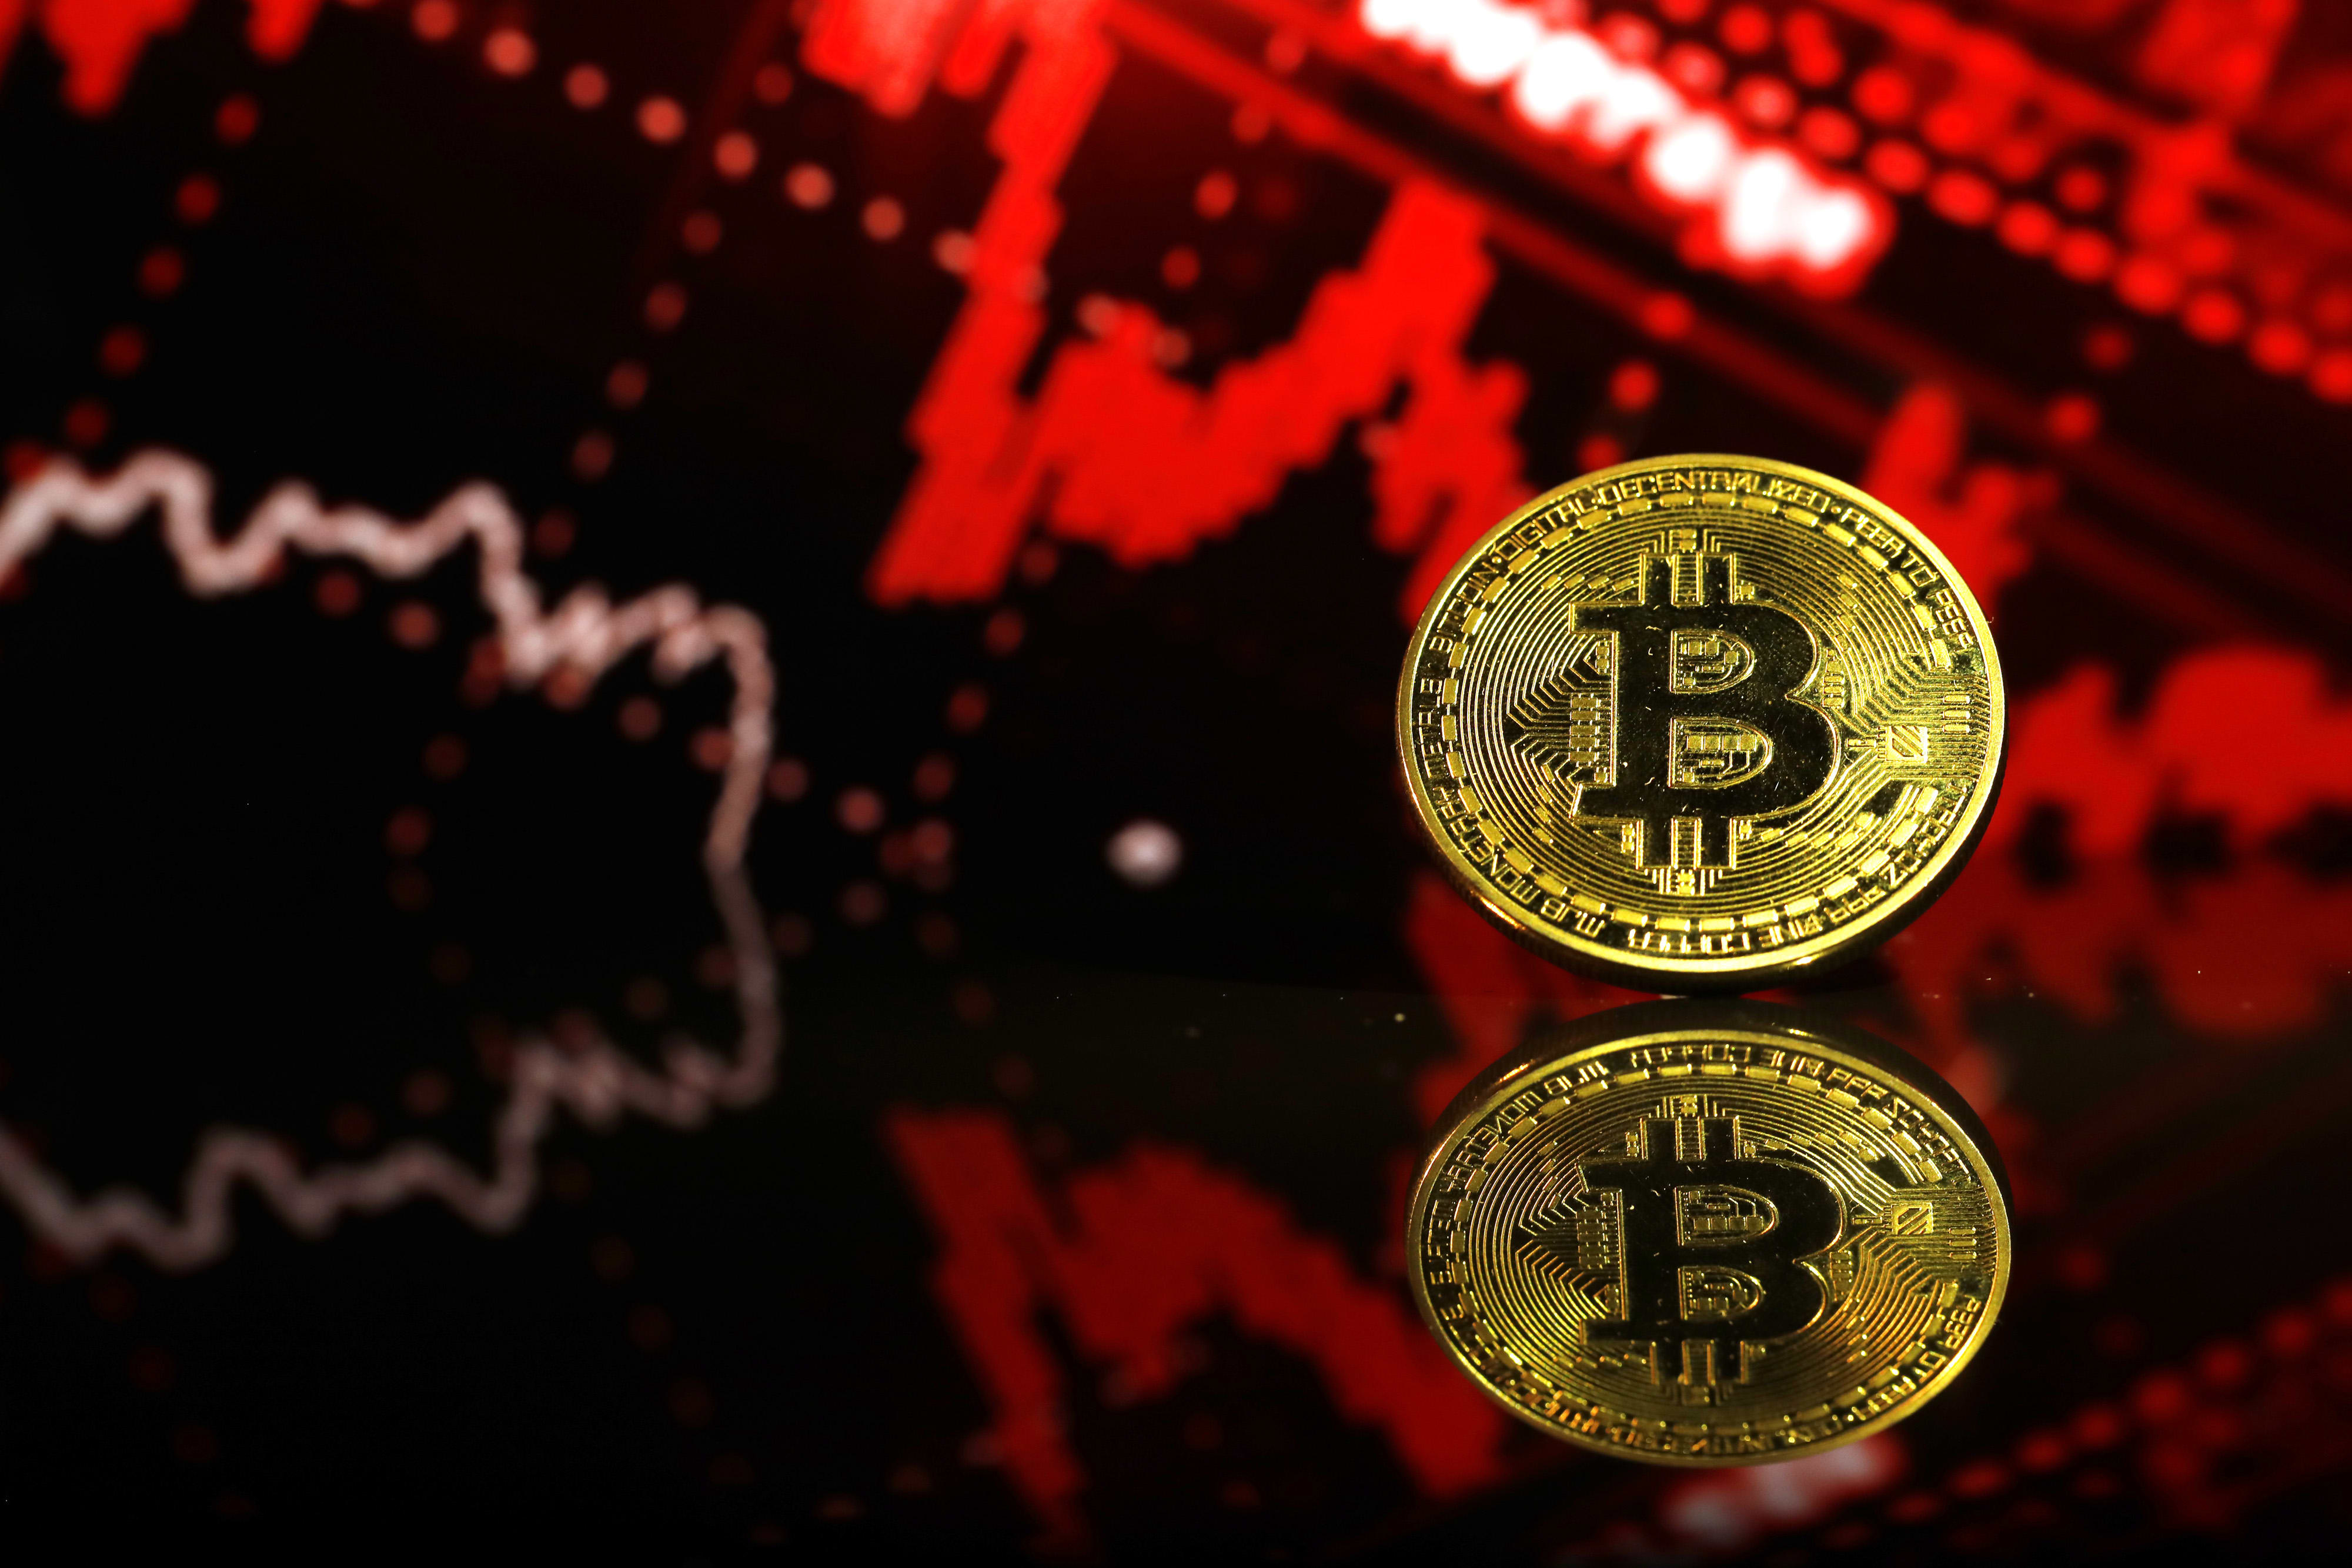 Bitcoin drops 10% to below $43,000 as risky assets tumble globally, regulatory c..